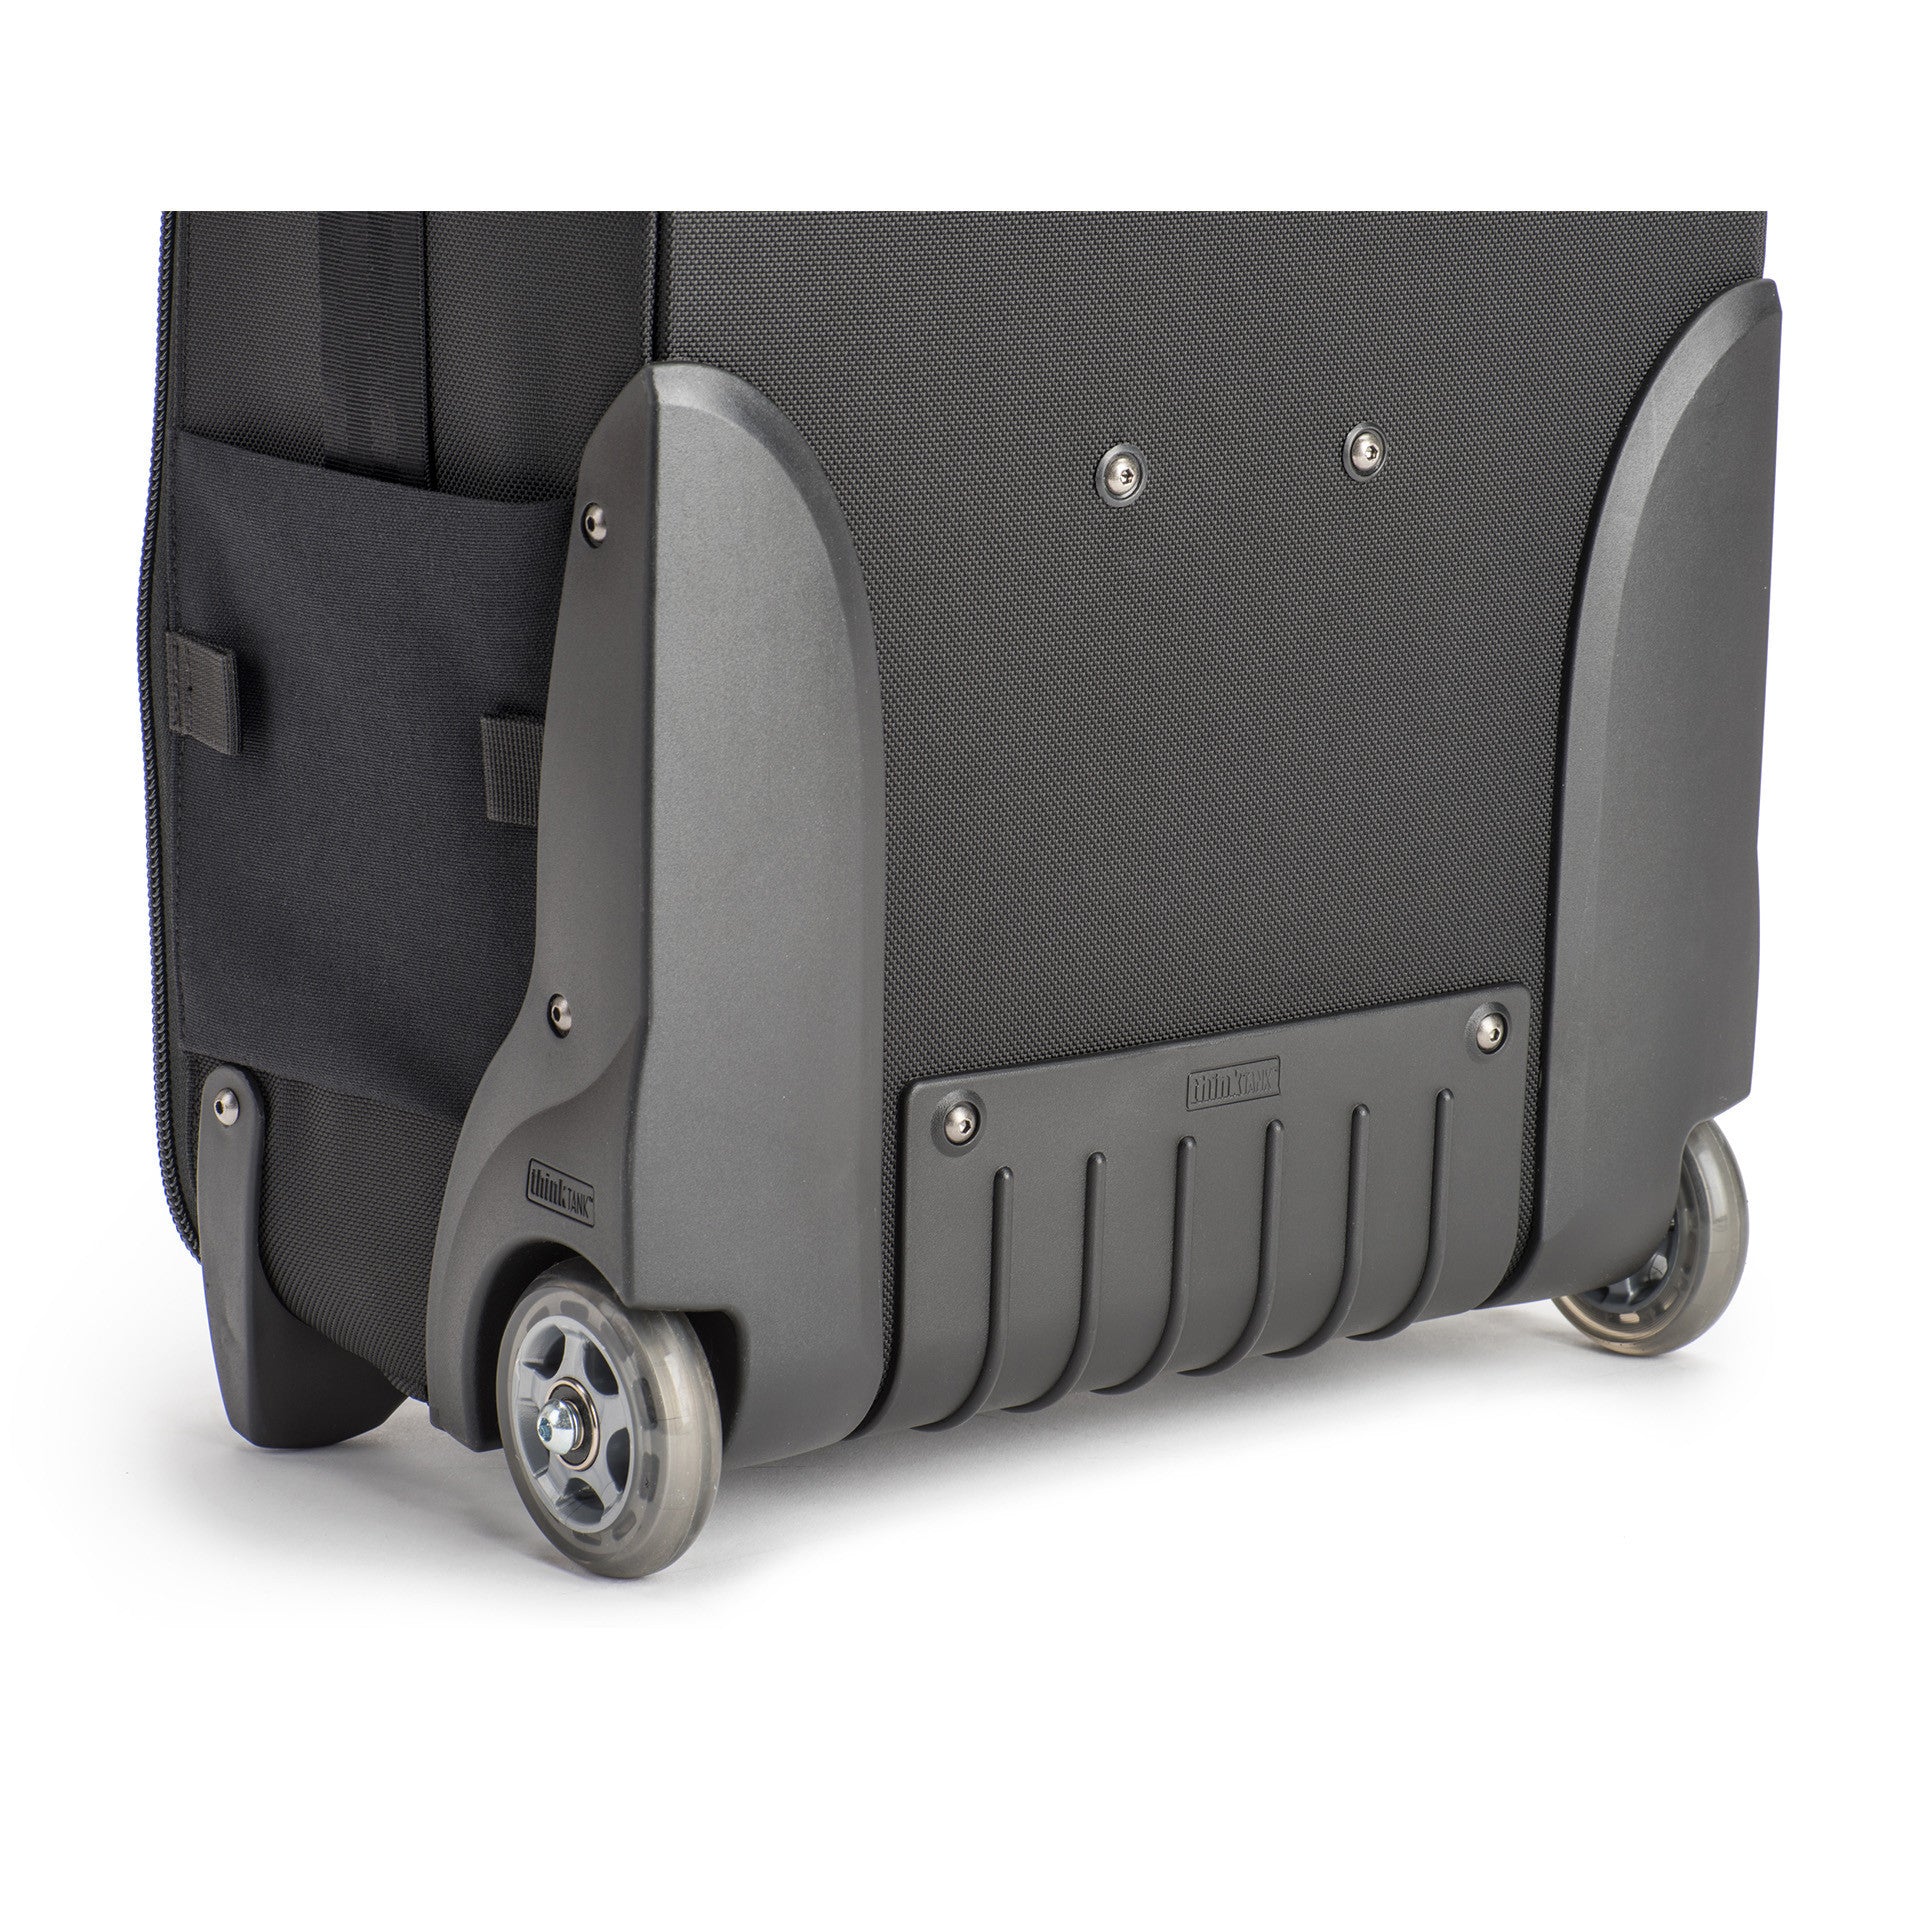 Think Tank Airport International V3.0 Rolling Camera Bag, bags roller bags, Think Tank Photo - Pictureline  - 6